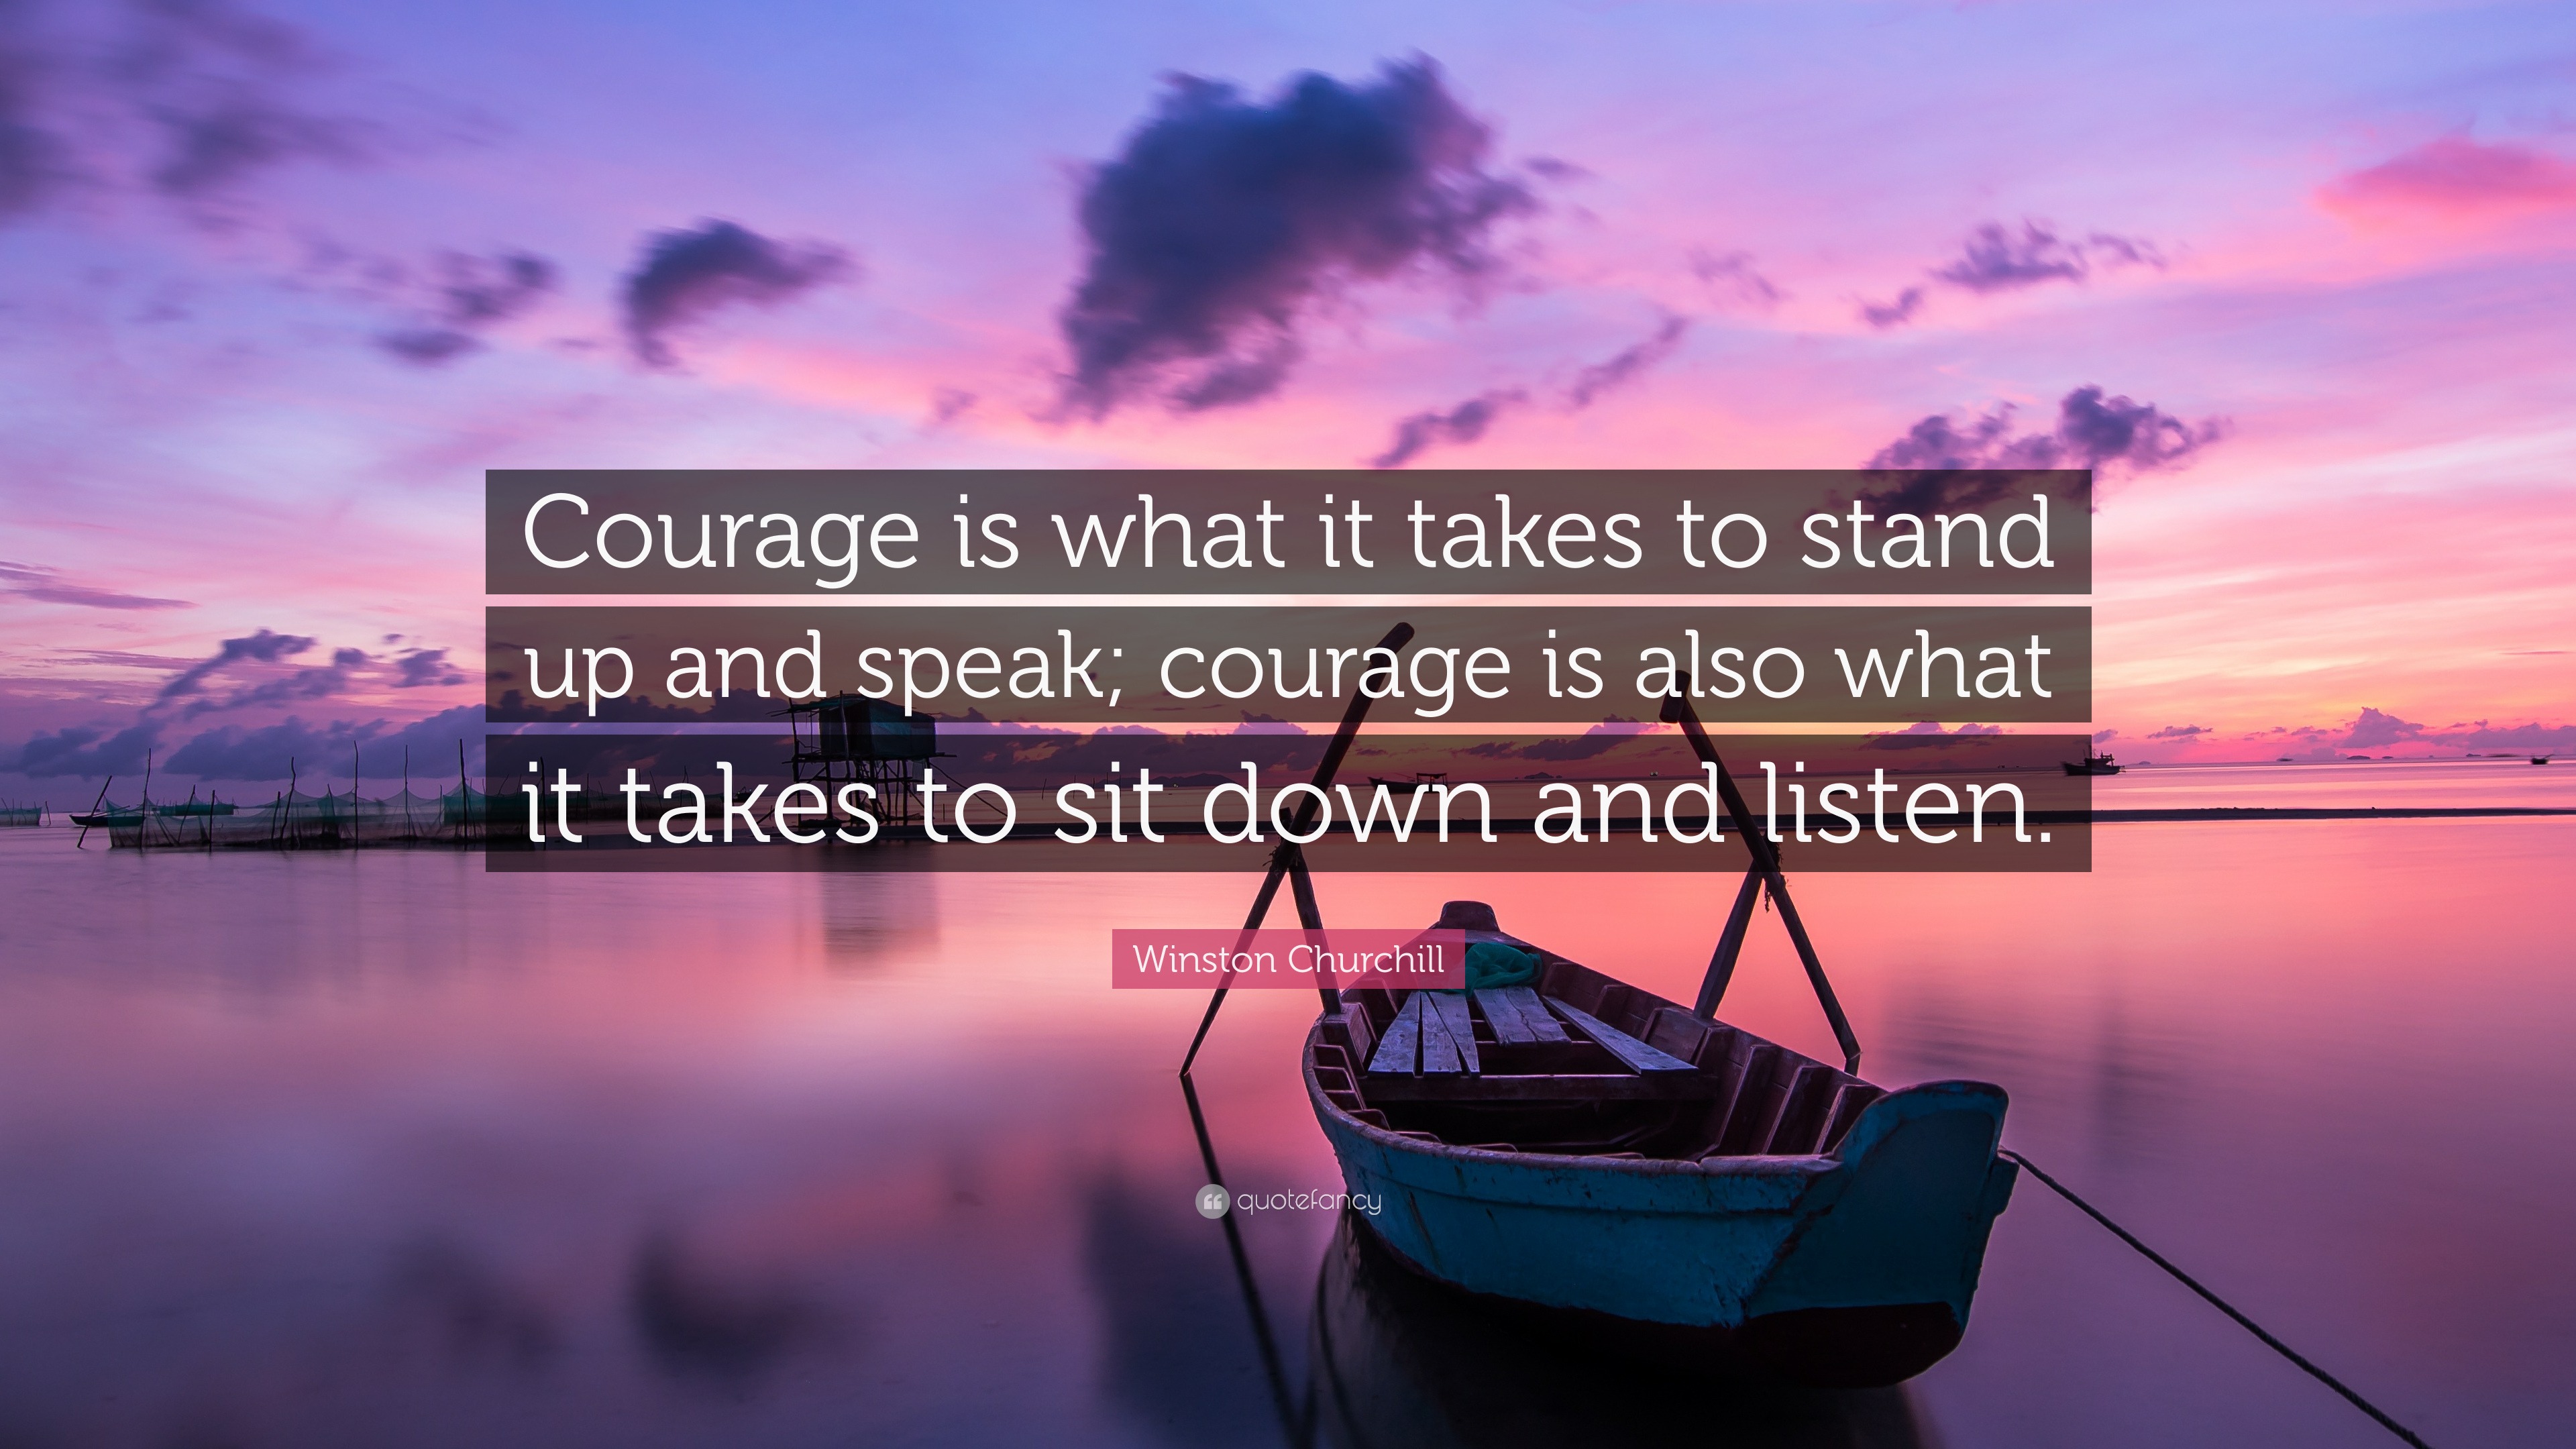 Winston Churchill Quote: "Courage is what it takes to ...